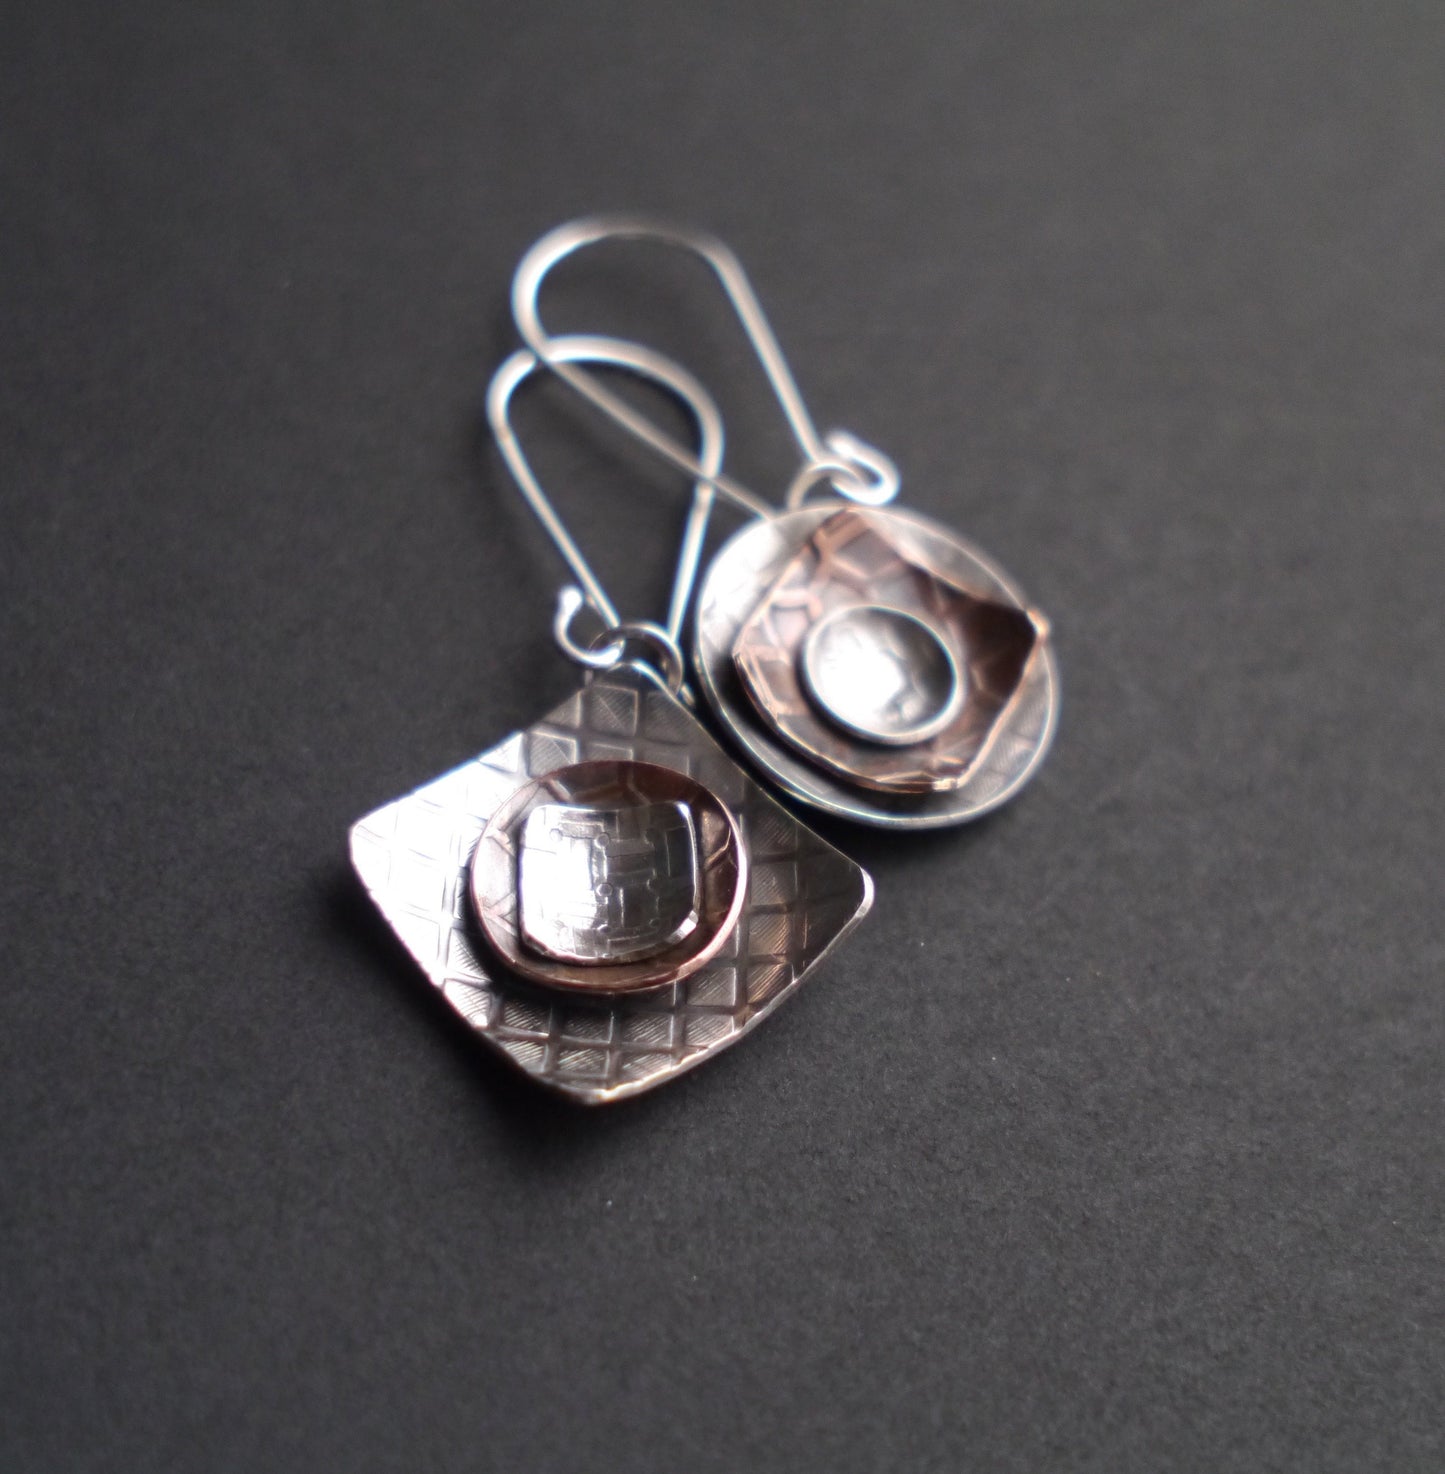 Concentric Ripples Asymmetrical Earrings (1)